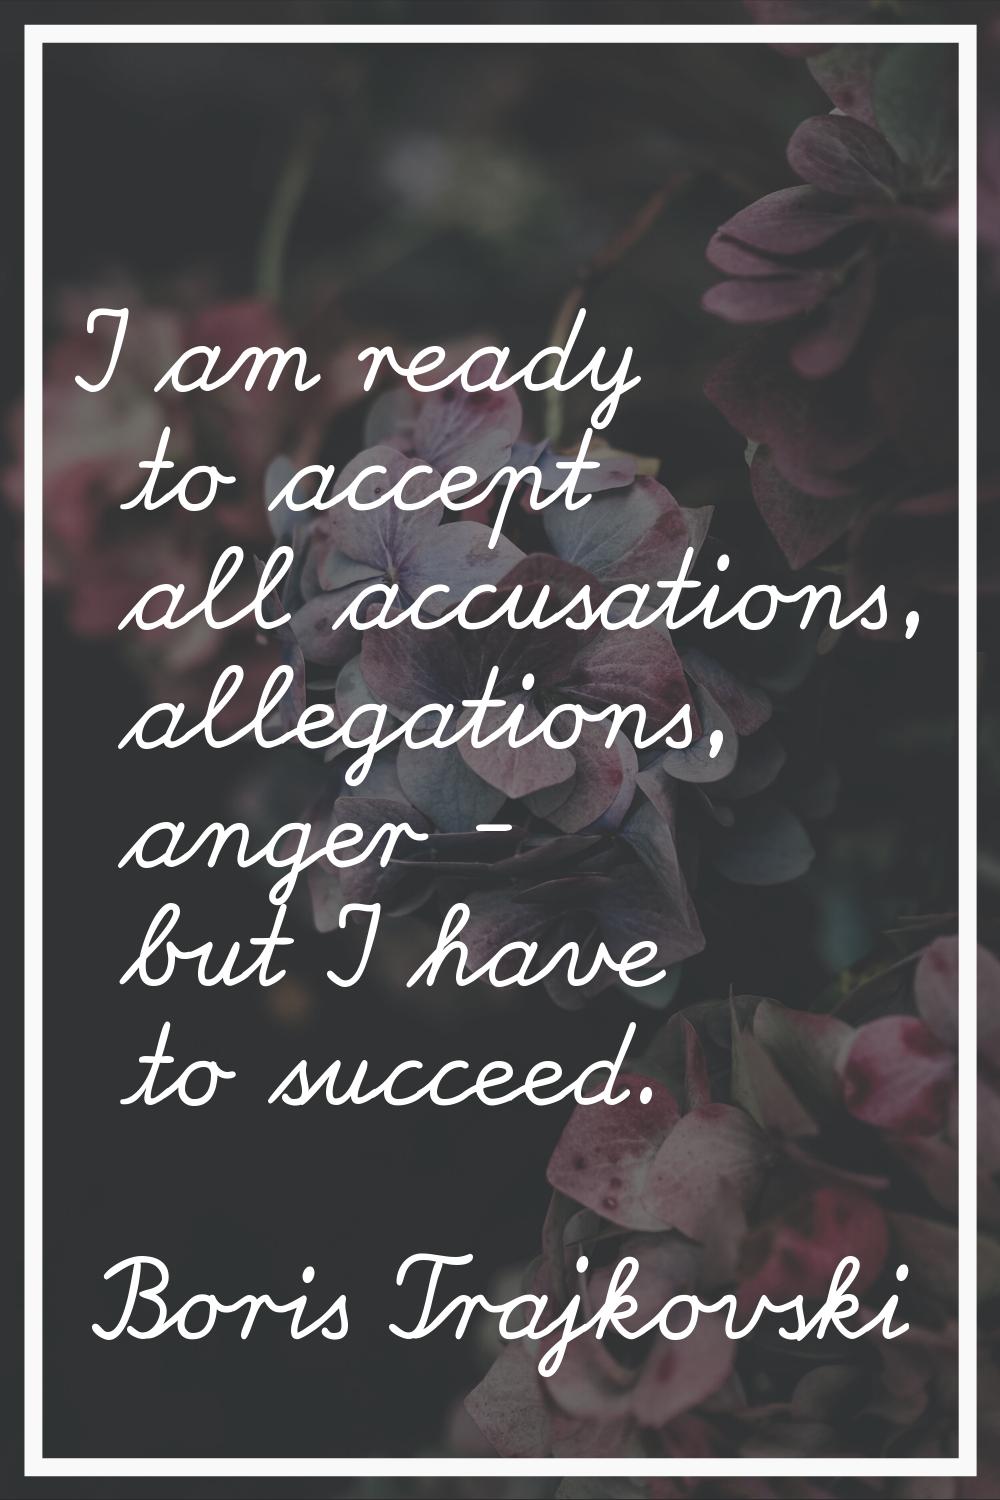 I am ready to accept all accusations, allegations, anger - but I have to succeed.